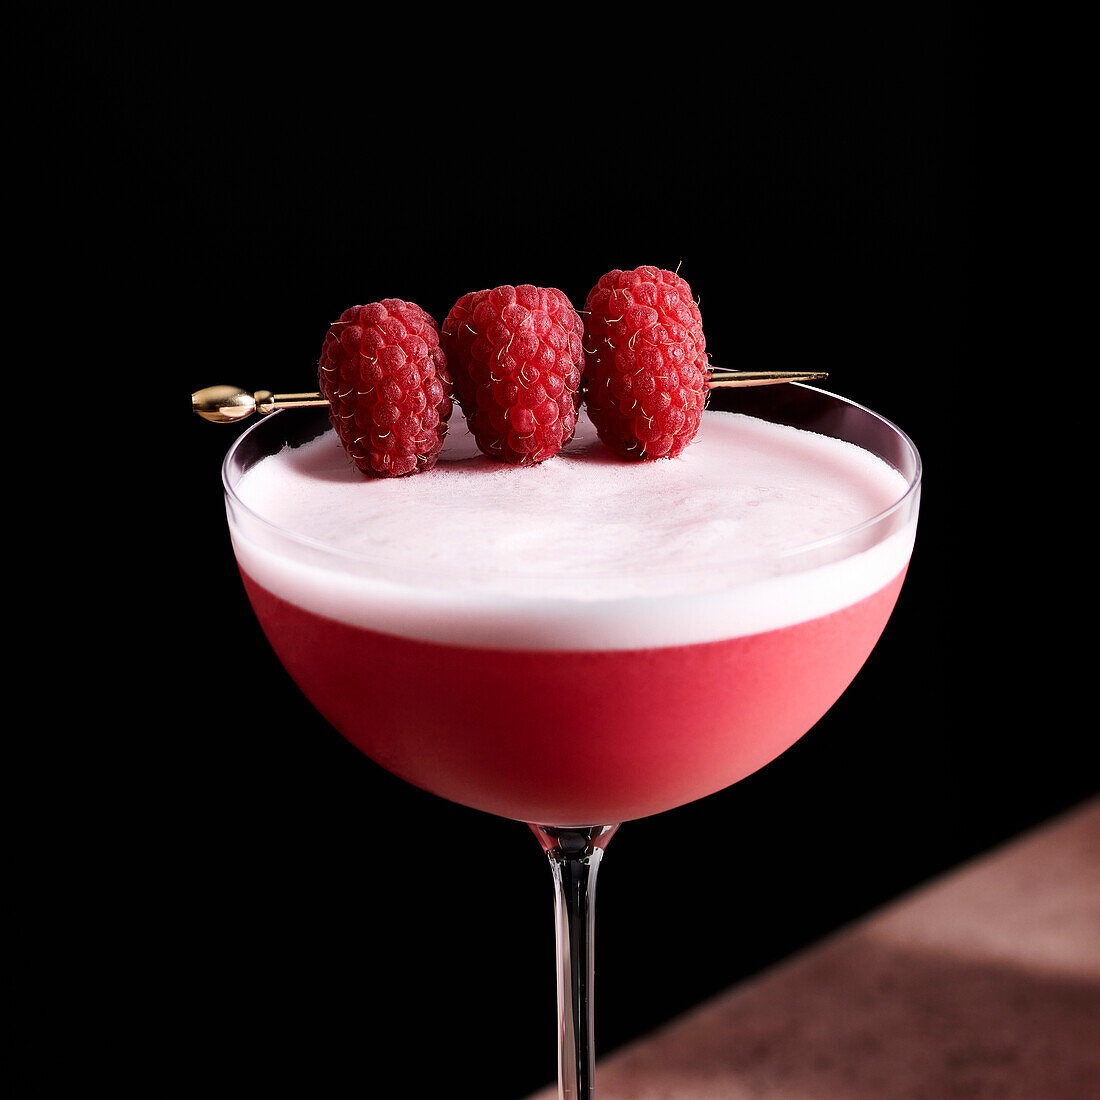 Clover club cocktail in a tall coupe glass garnished with three raspberries on a gold pick.